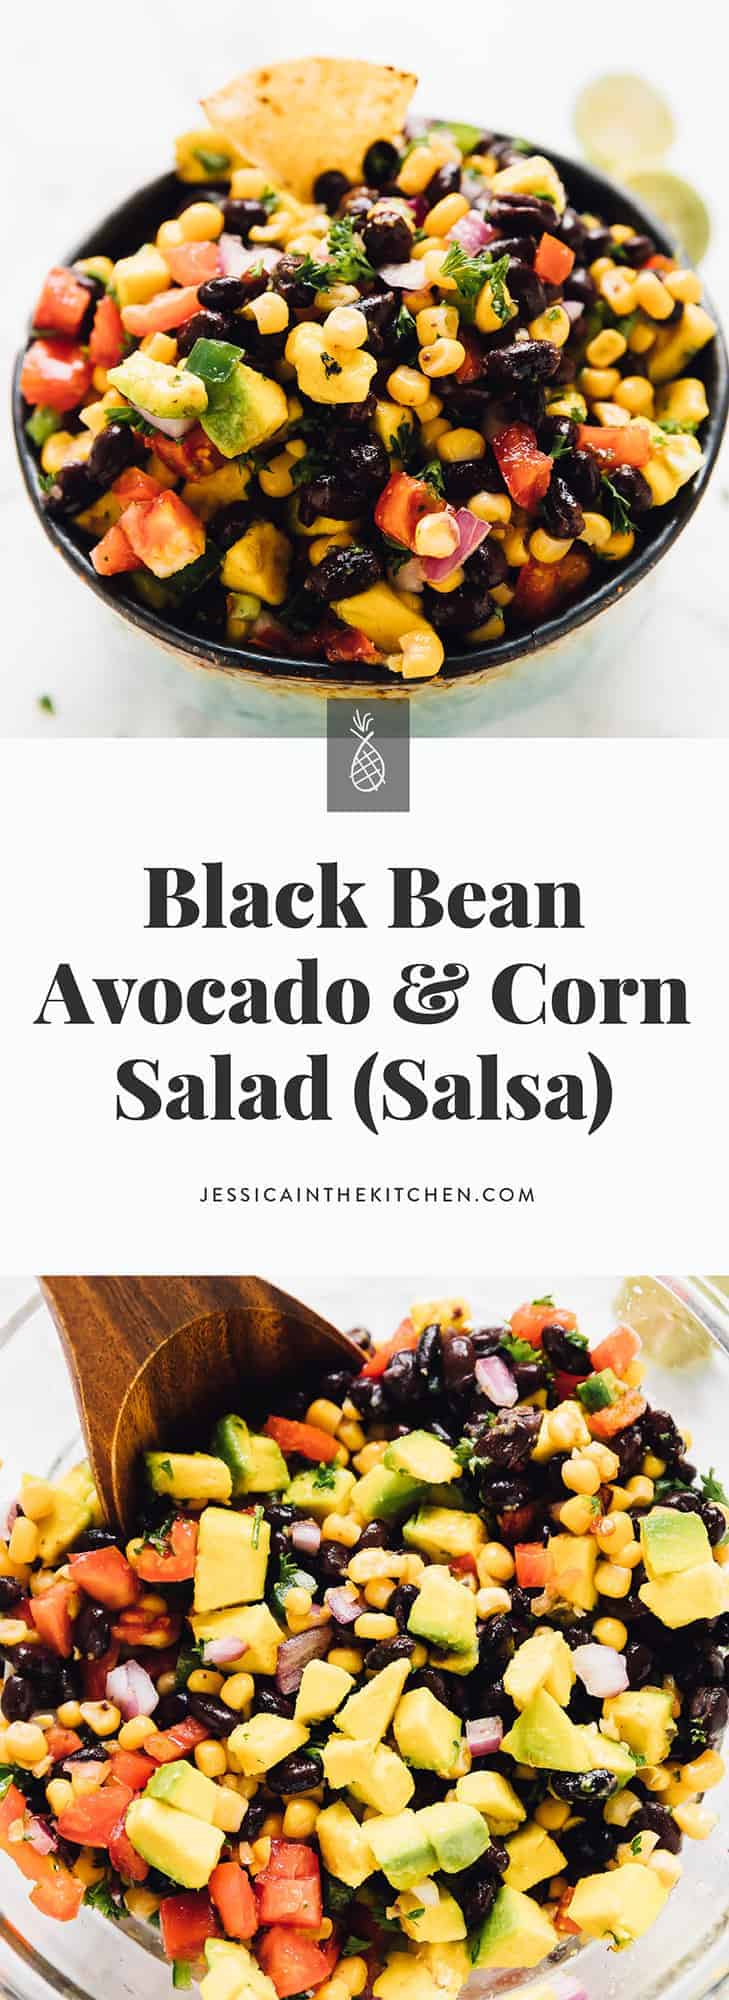 This Black Bean Avocado and Corn Salad is the easiest salad you’ll ever make! It takes 15 minutes, is loaded with a variety of delicious flavours and is so versatile as a dip, salsa or salad! via https://jessicainthekitchen.com